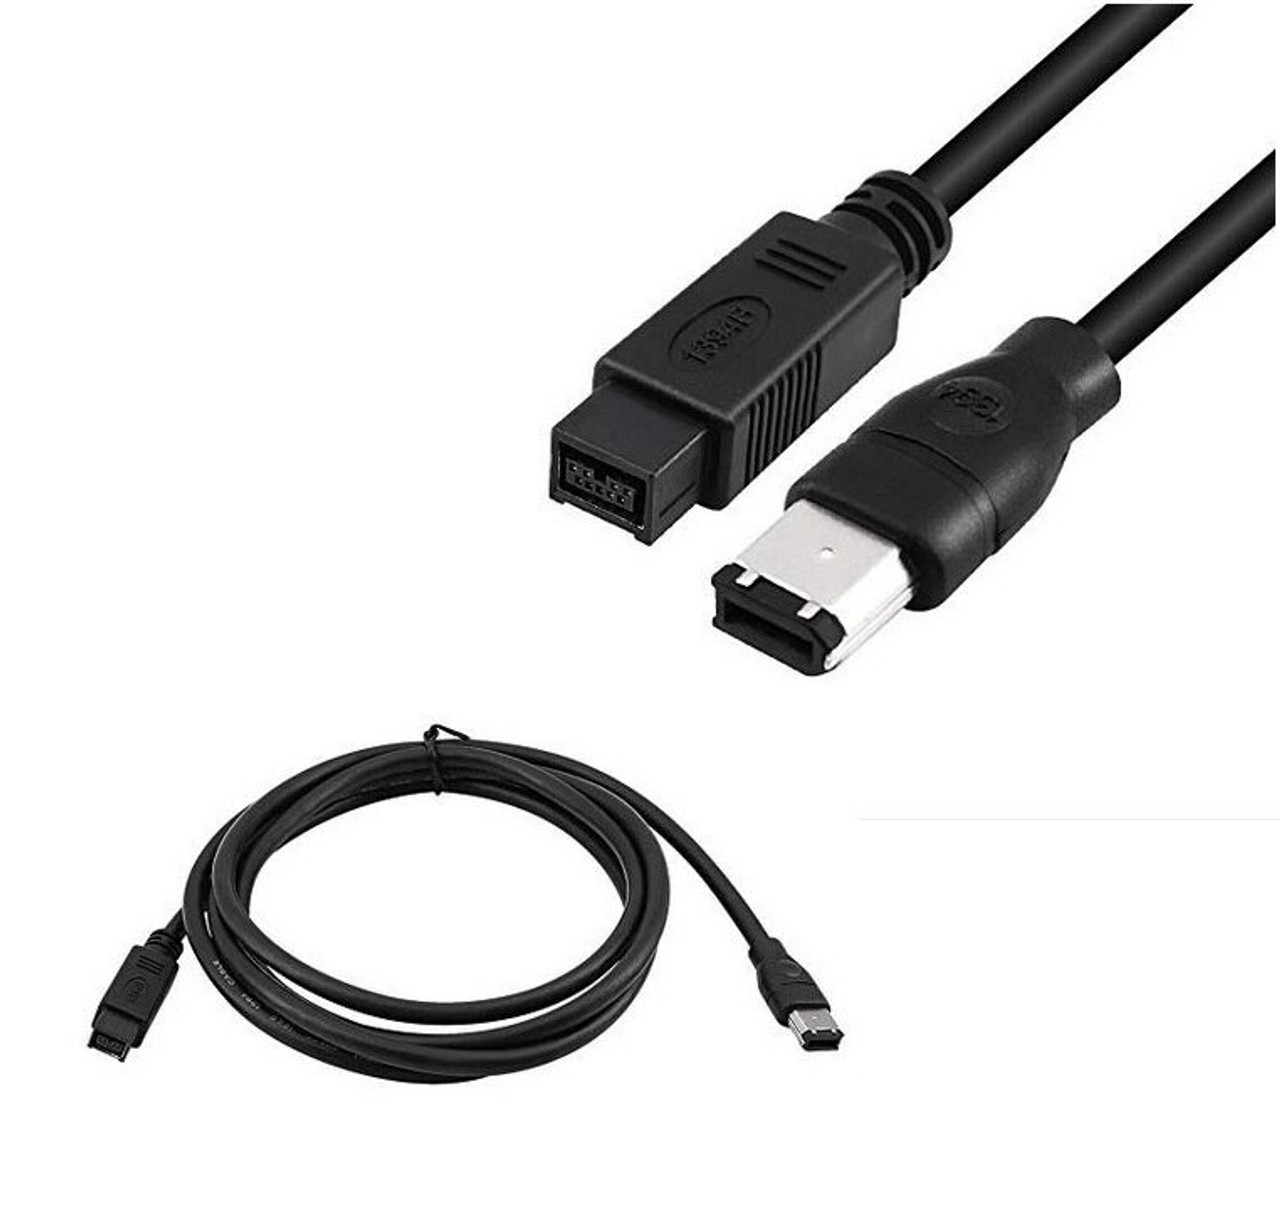 Firewire IEEE1394 800 to 400 9-Pin to 6-Pin Adapter Cable 1.8M Cord